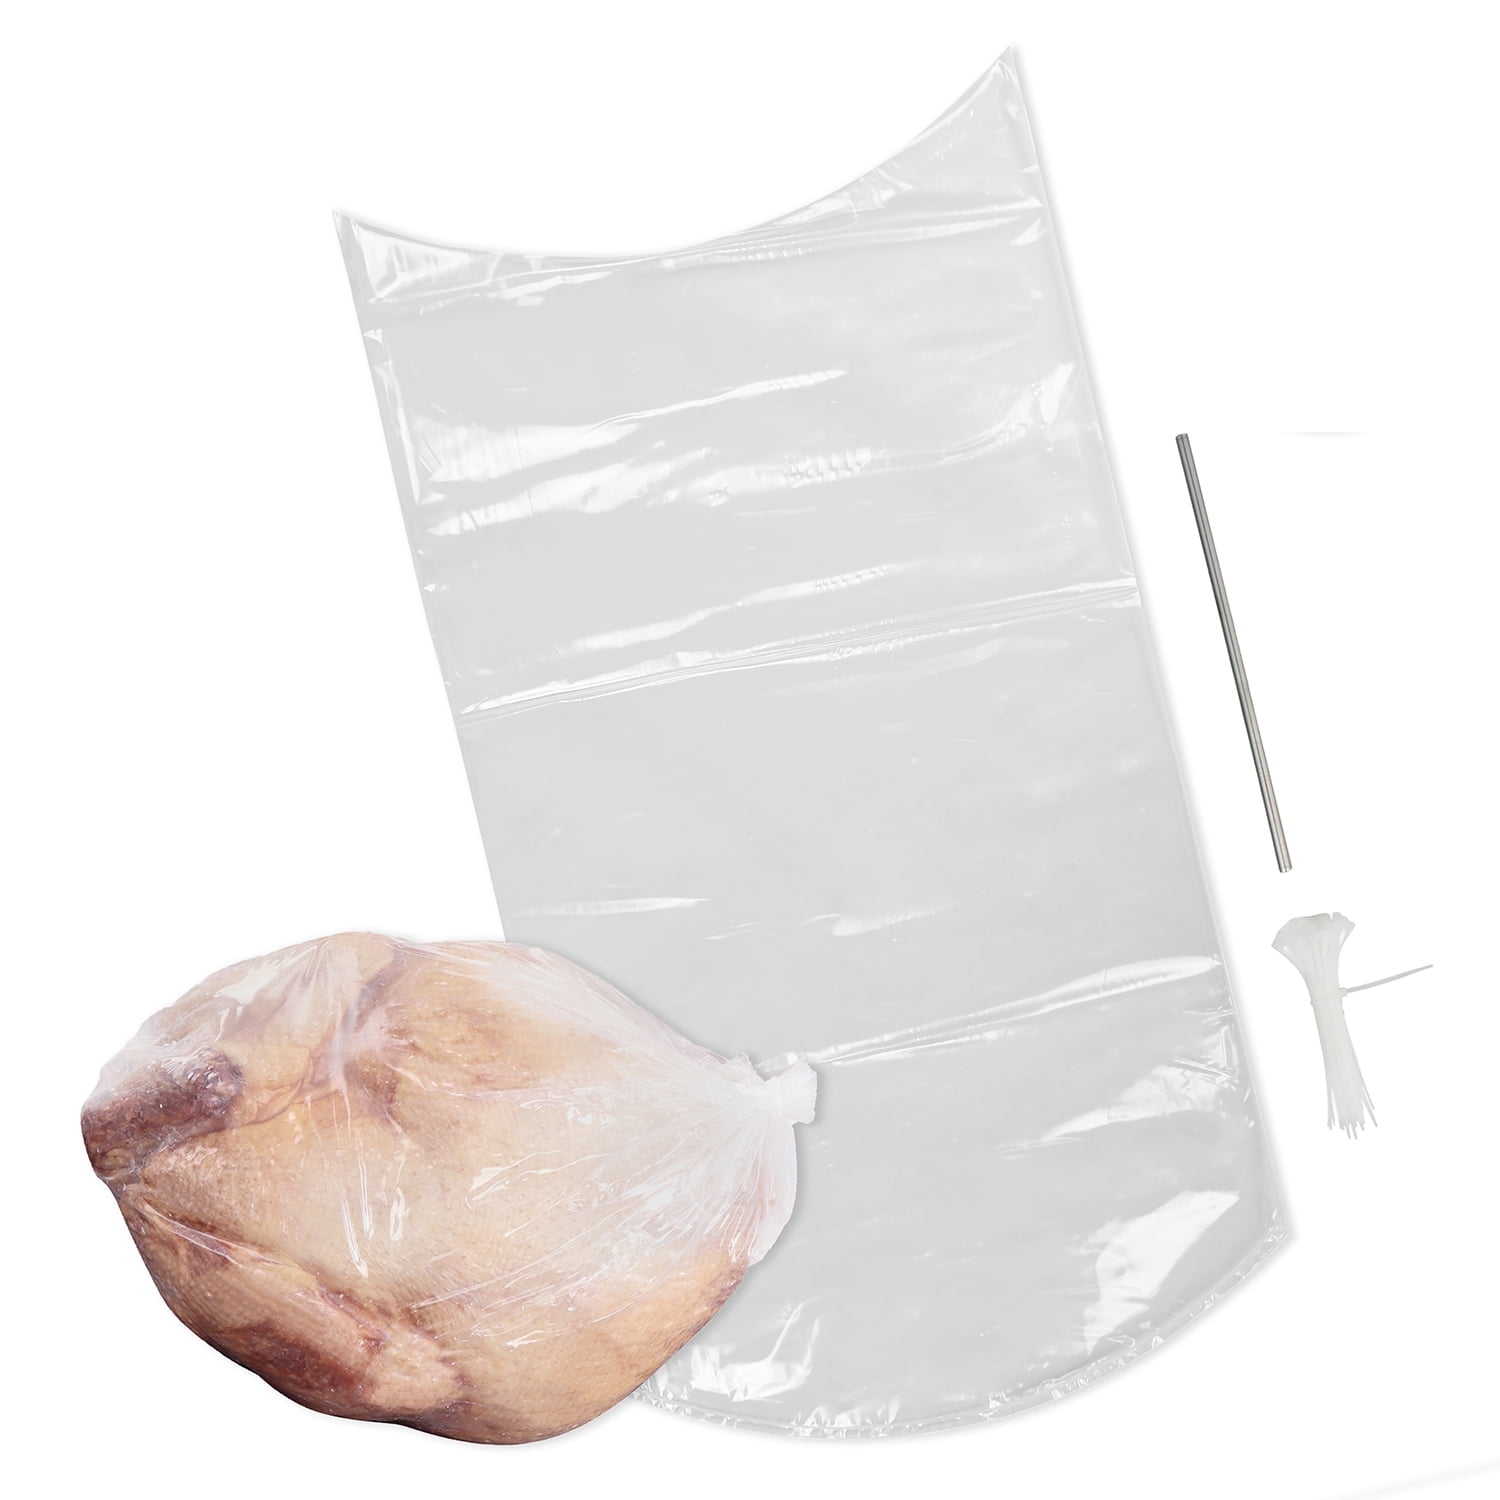 Rural365 Poultry Shrink Bags 25ct Large Turkey Bag - 16 x 28 Inch w/ Steel  Straw